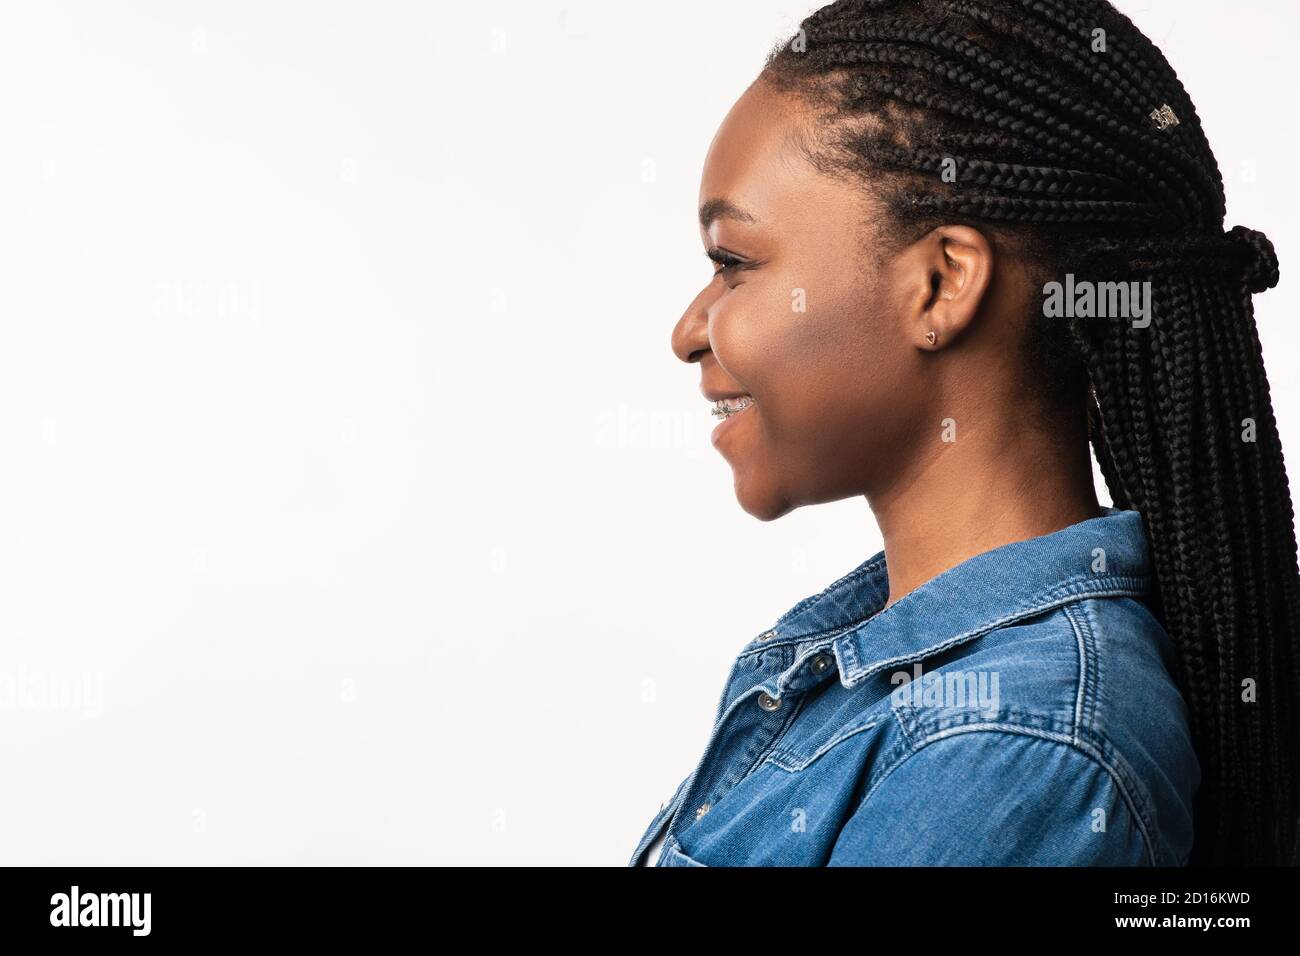 African Lady With Braided Hairstyle Posing Over White Background, Side-View  Stock Photo - Alamy